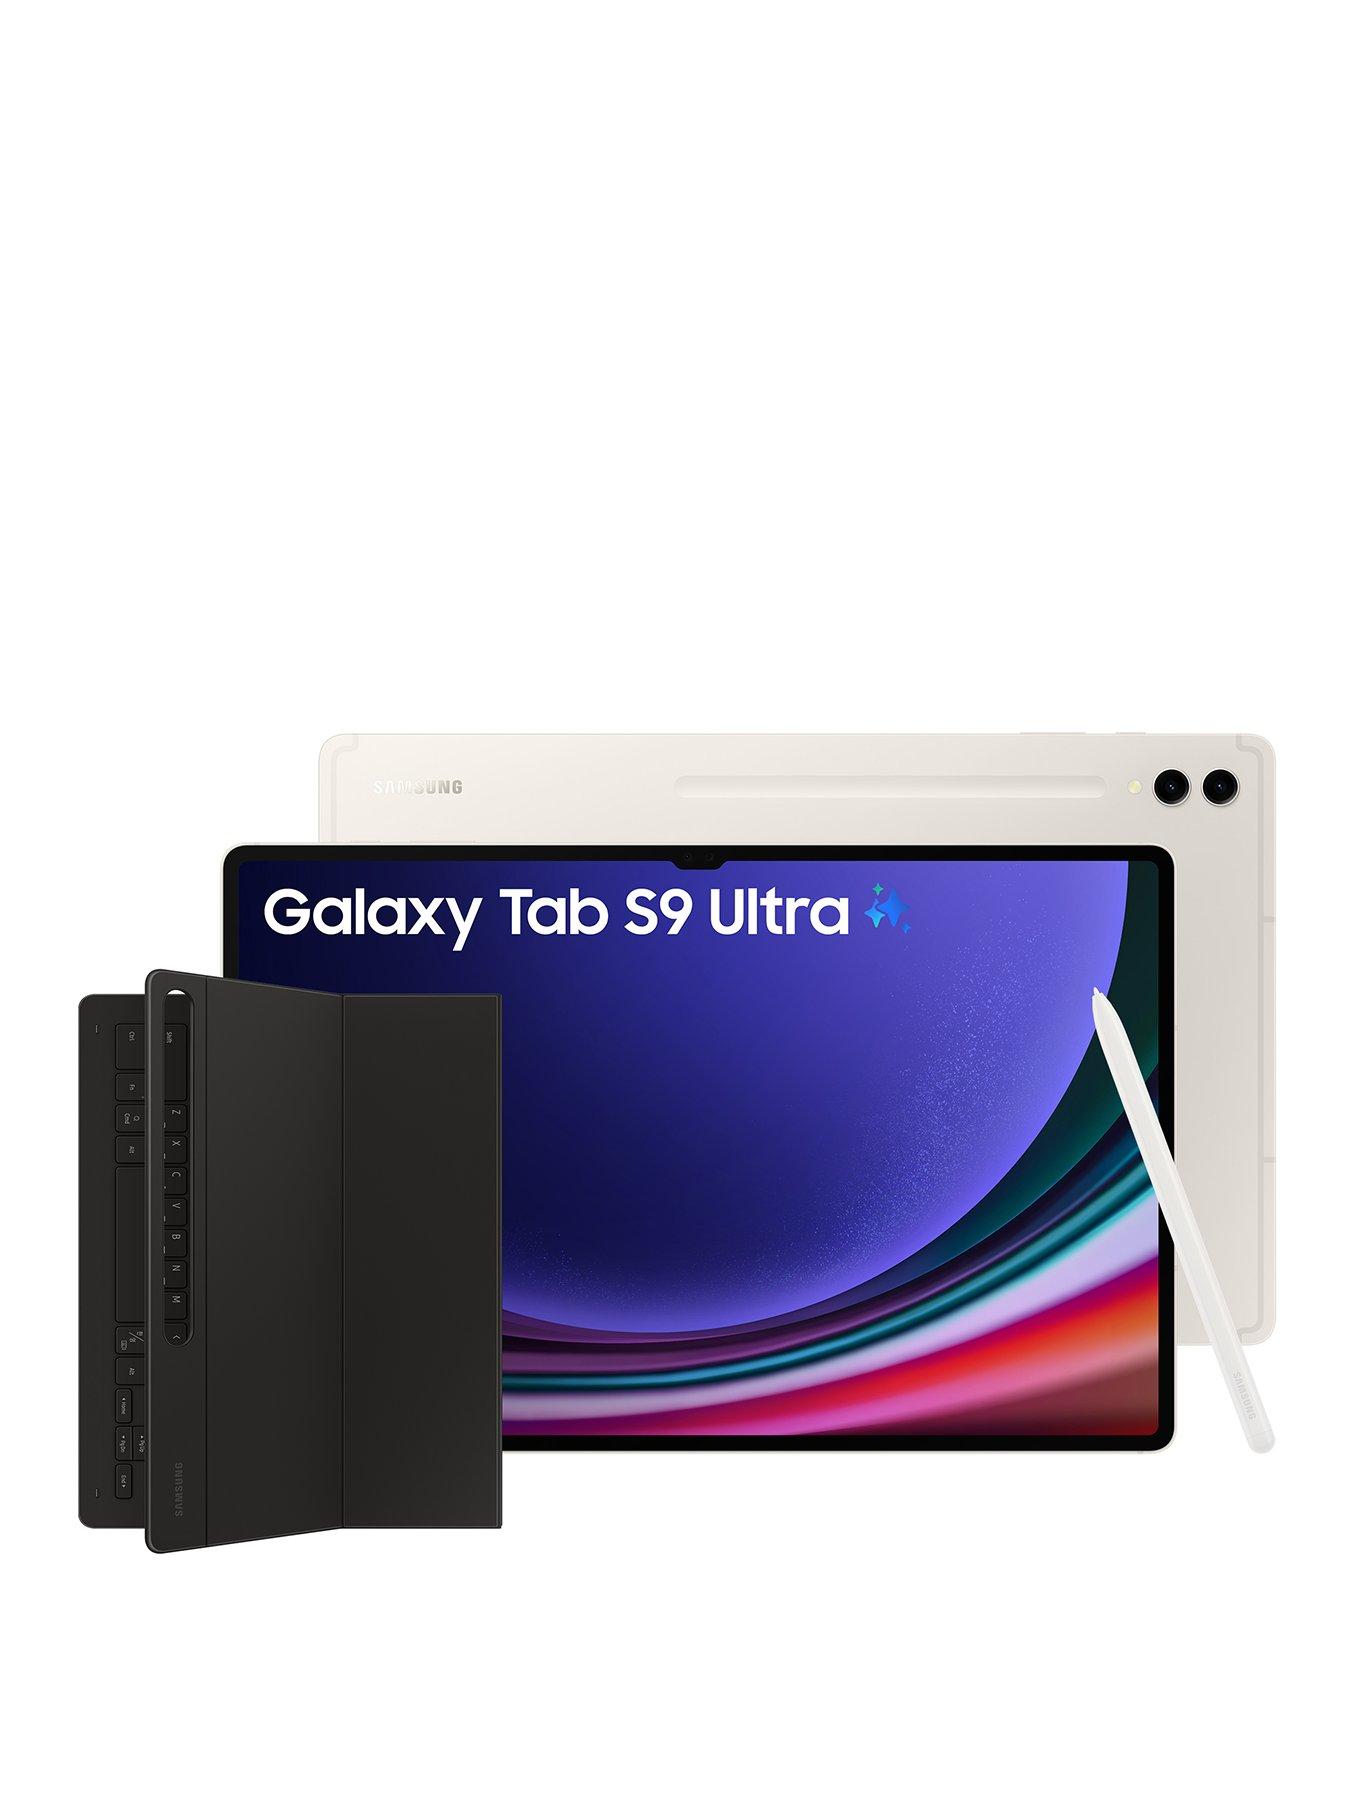 Samsung, Galaxy Tablets & kindles, Electricals